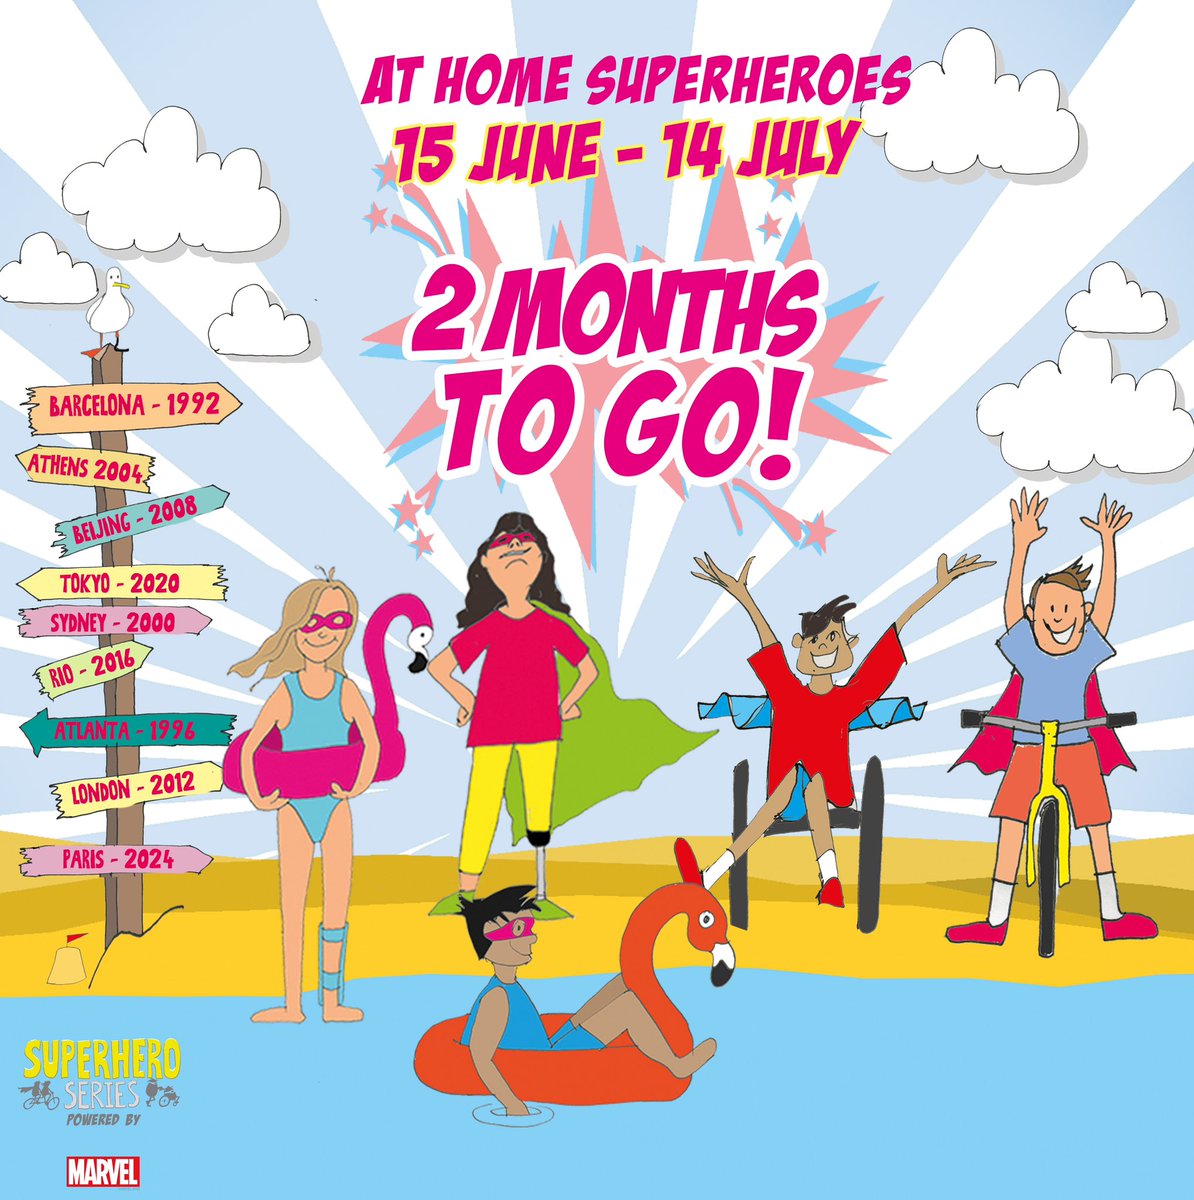 POW!! Who’s excited???? SIGN UP & SAVE THE DAY!! #findyourpower superheroseries.co.uk